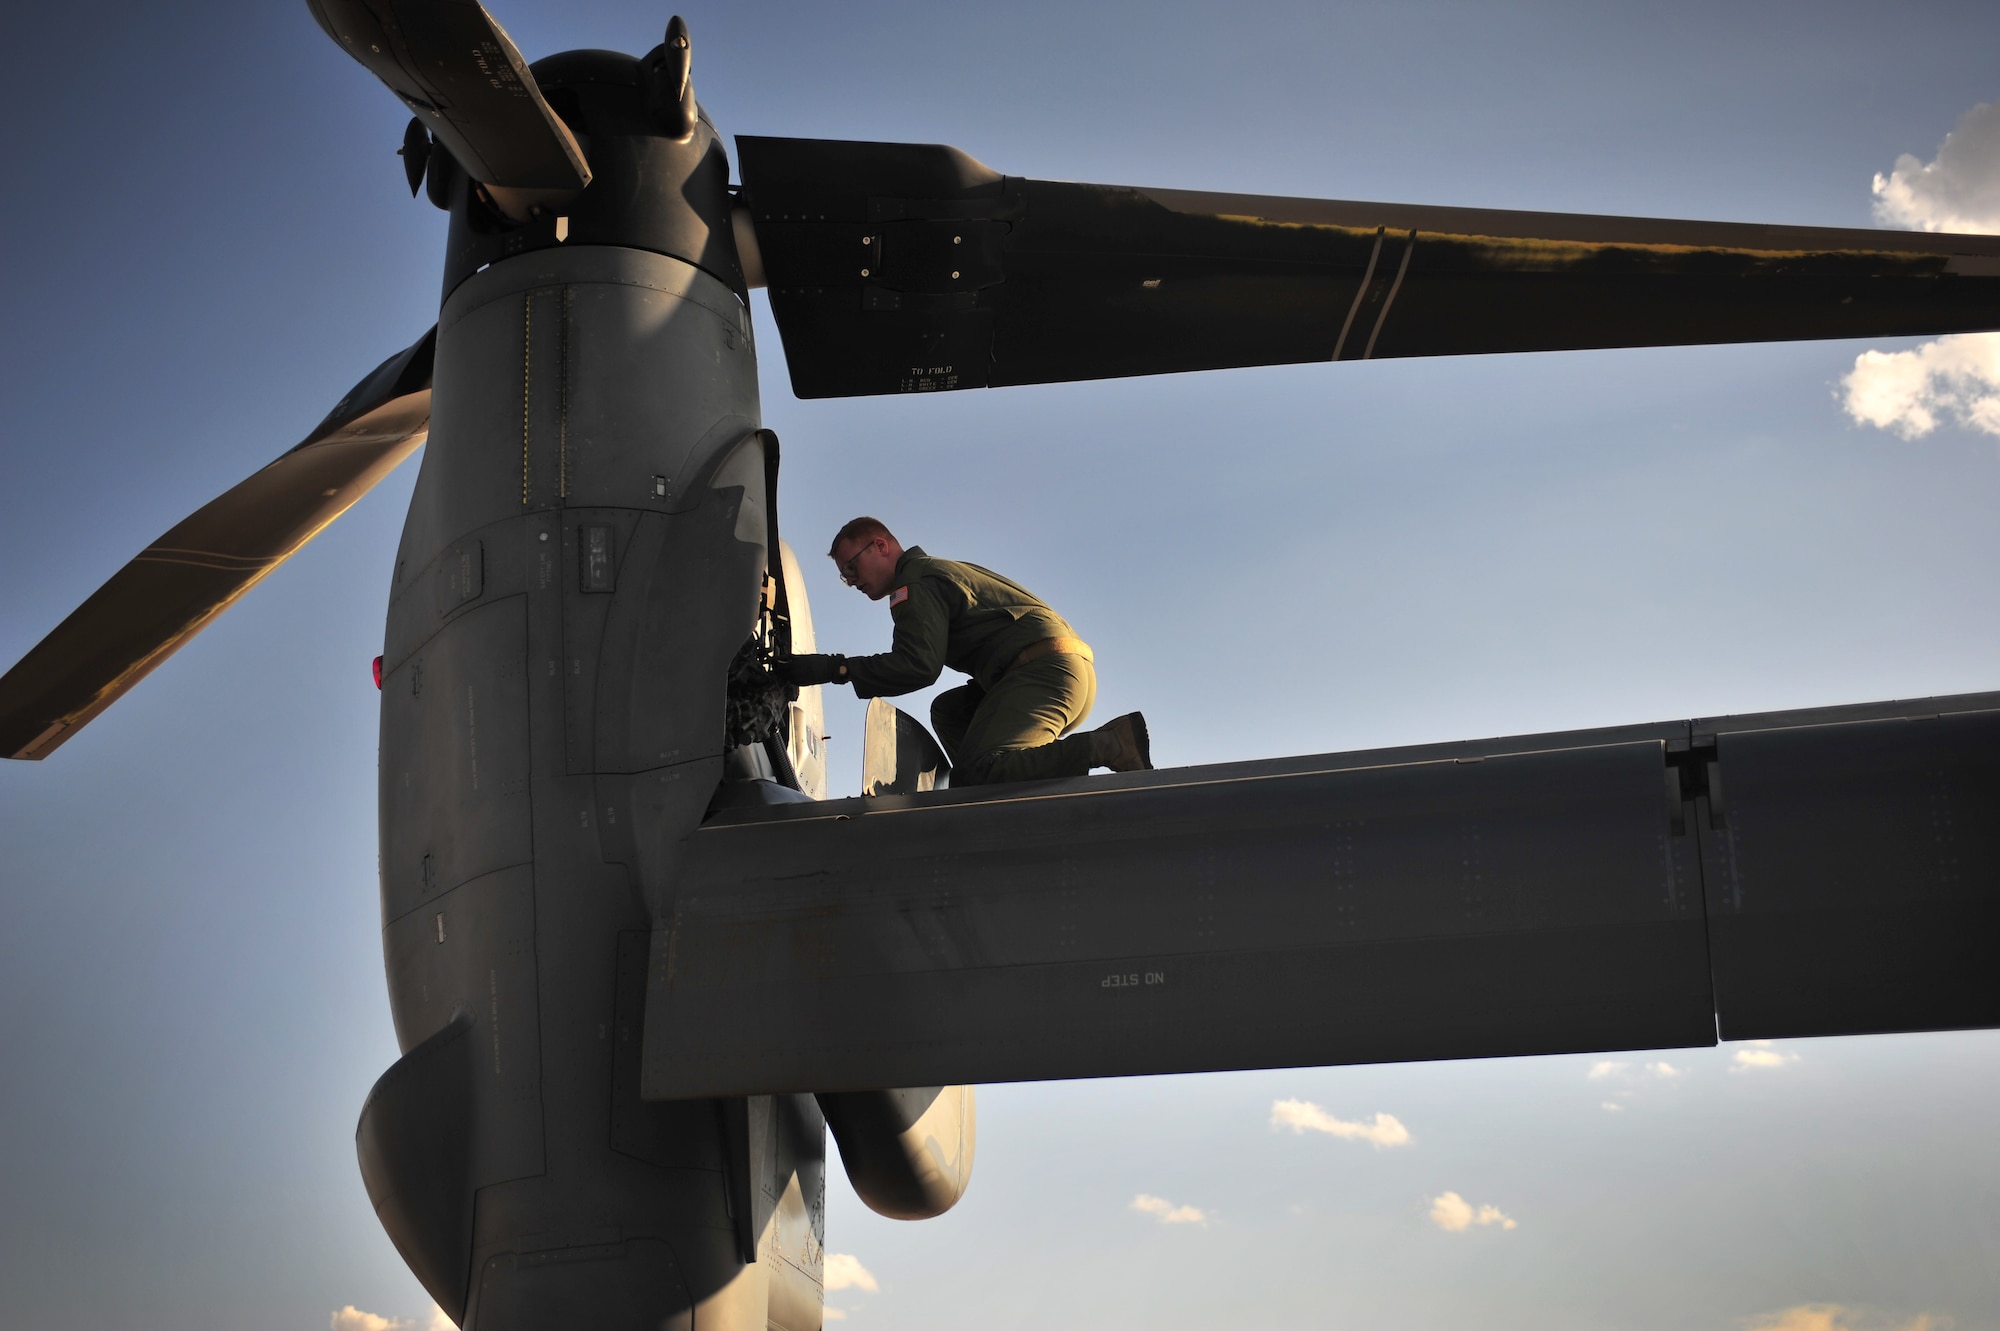 U.S. Air Force Staff Sgt. Casey Spang, 20th Special Operations Squadron flight engineer, inspects one of the tilt-rotors on a CV-22 Osprey prior to takeoff on the flightline at Cannon Air Force Base, N.M., July 5, 2012. The 20 SOS conducted a routine training flight over Melrose Air Force Range, N.M. (U.S. Air Force photo by Airman 1st Class Alexxis Pons Abascal)